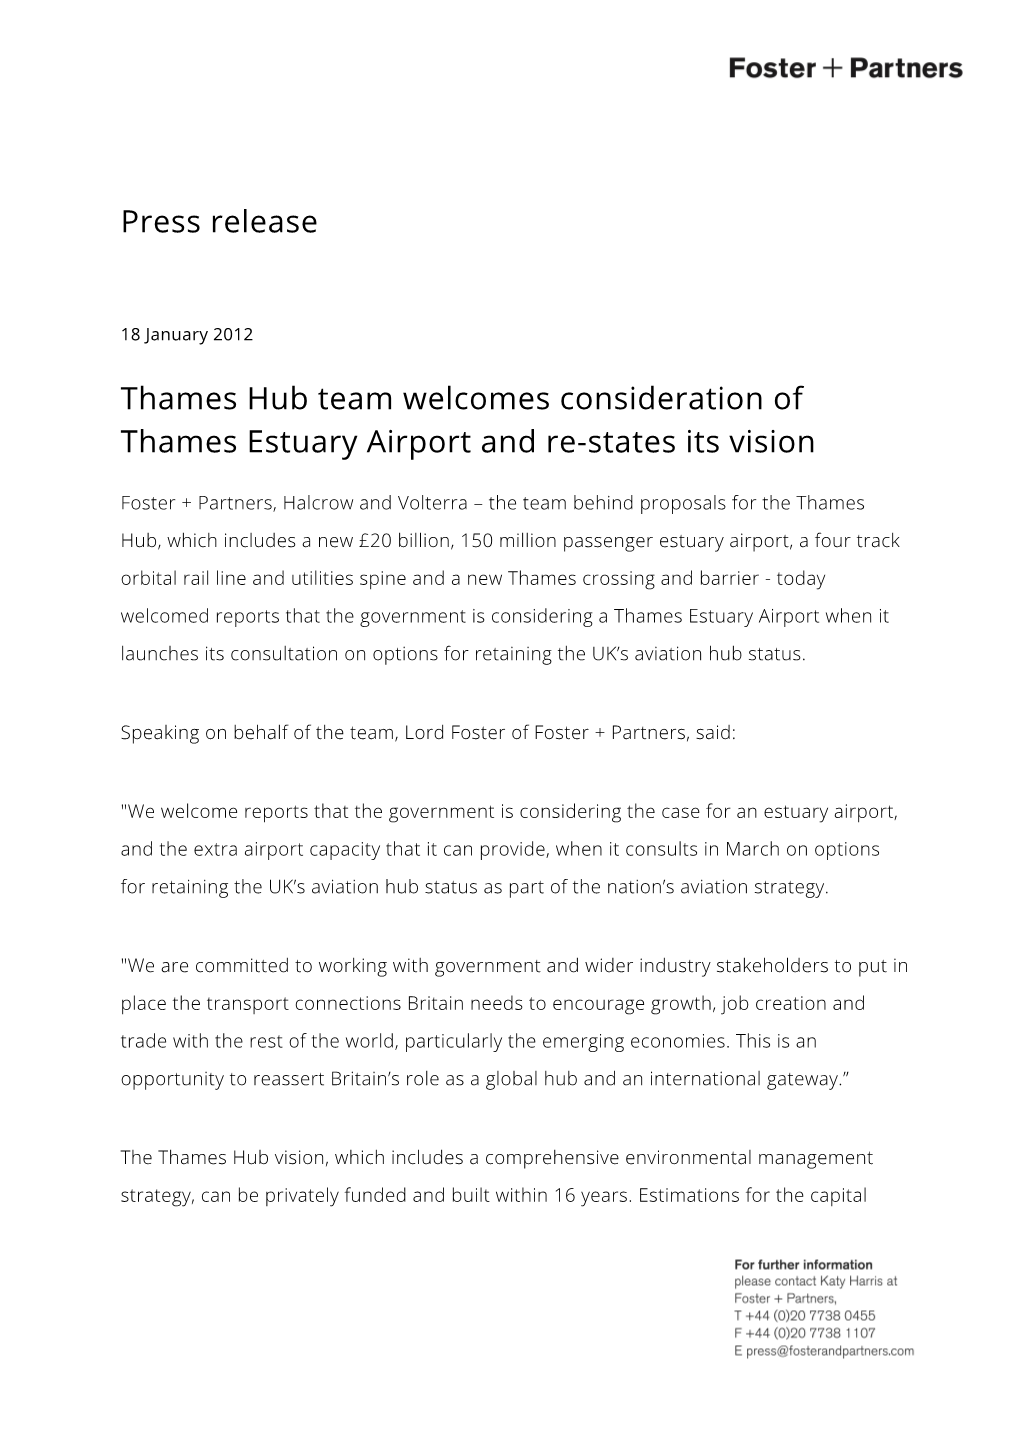 Press Release Thames Hub Team Welcomes Consideration of Thames Estuary Airport and Re-States Its Vision